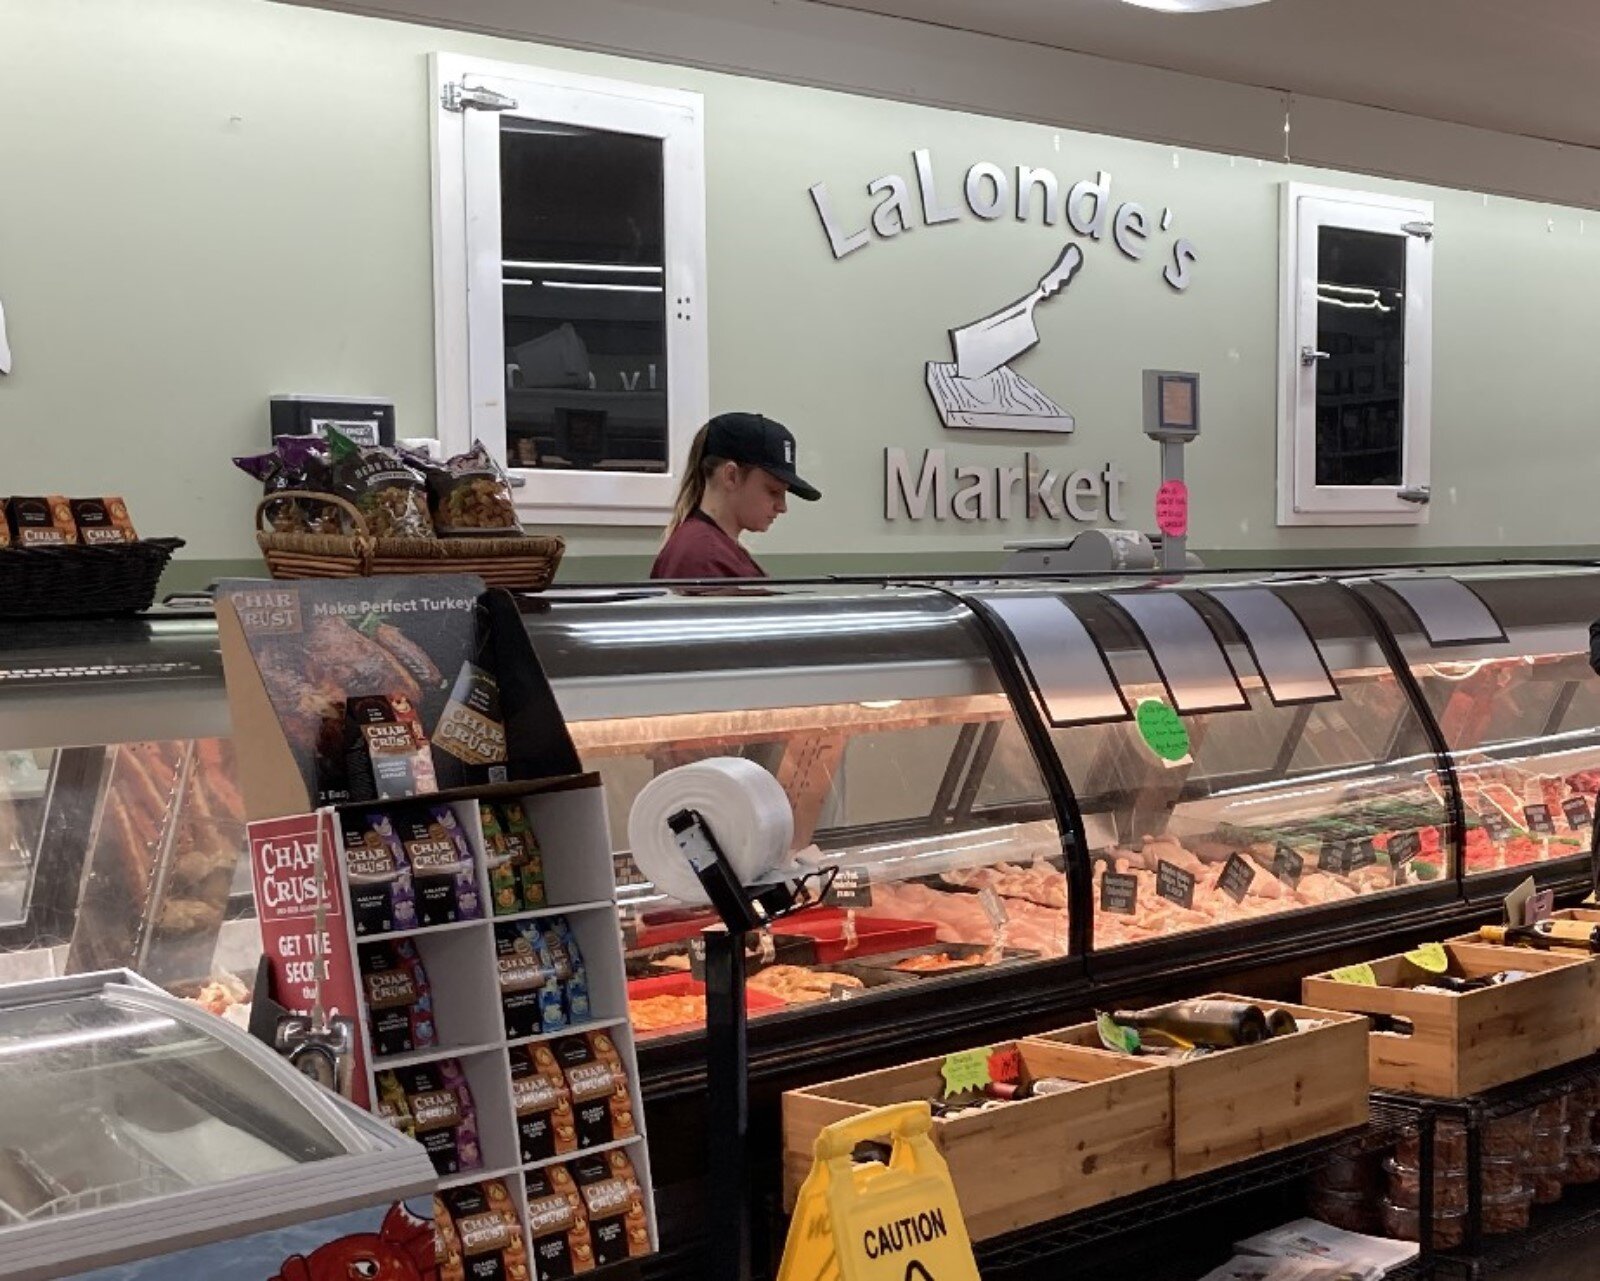 Serving a customer at LaLonde's Market in Midland.